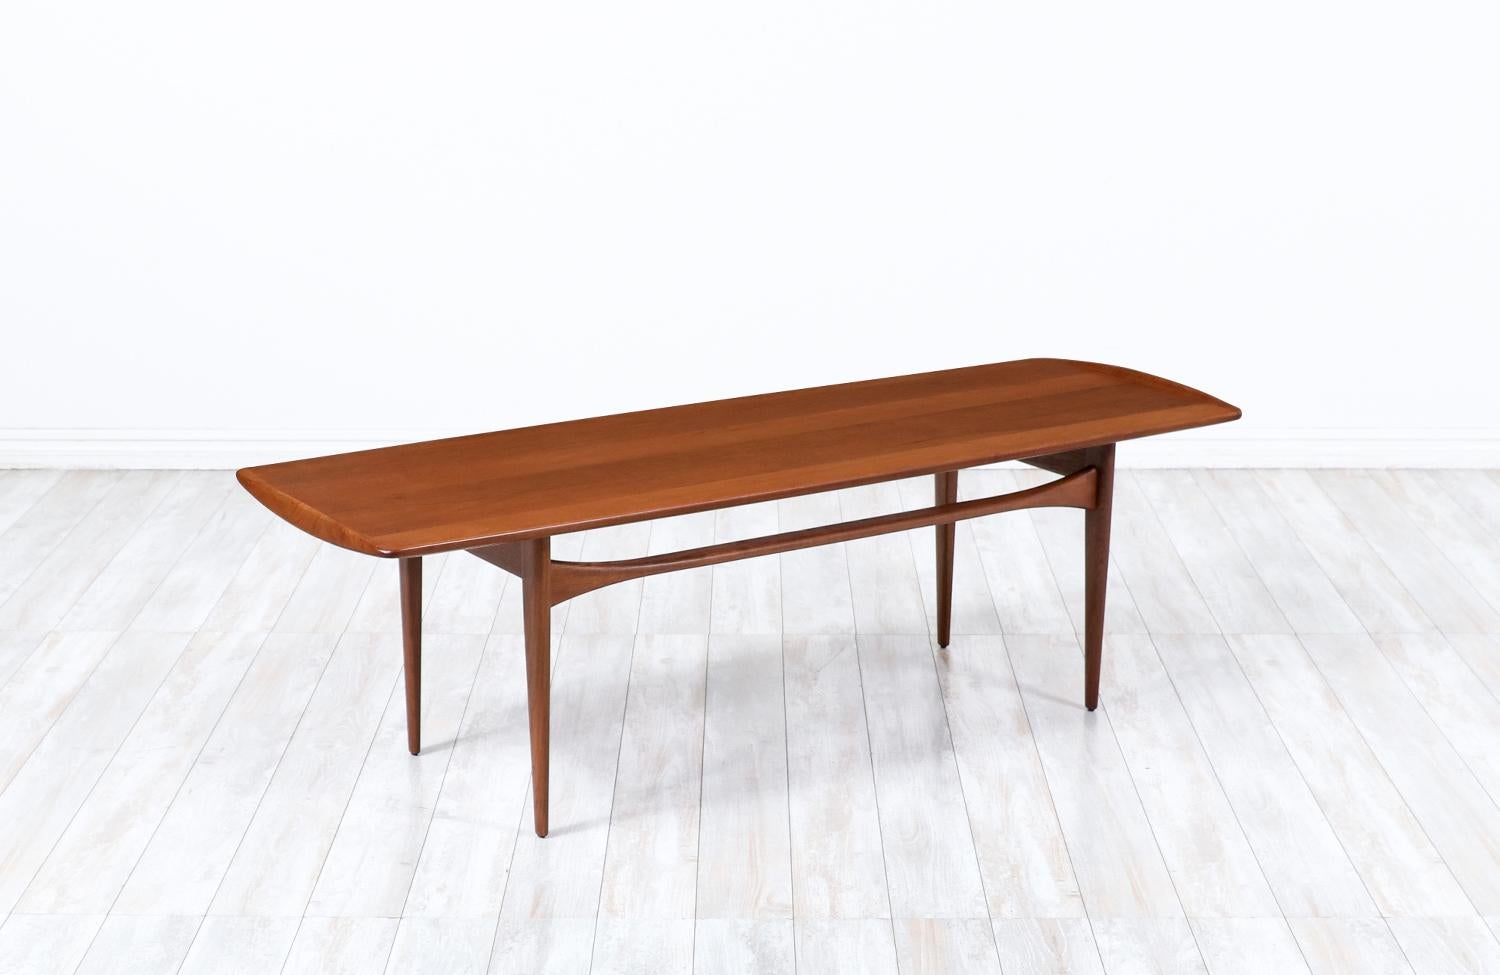 Tove & Edvard Kindt-Larsen Teak Coffee Table for France & Son

________________________________________

Transforming a piece of Mid-Century Modern furniture is like bringing history back to life, and we take this journey with passion and precision.